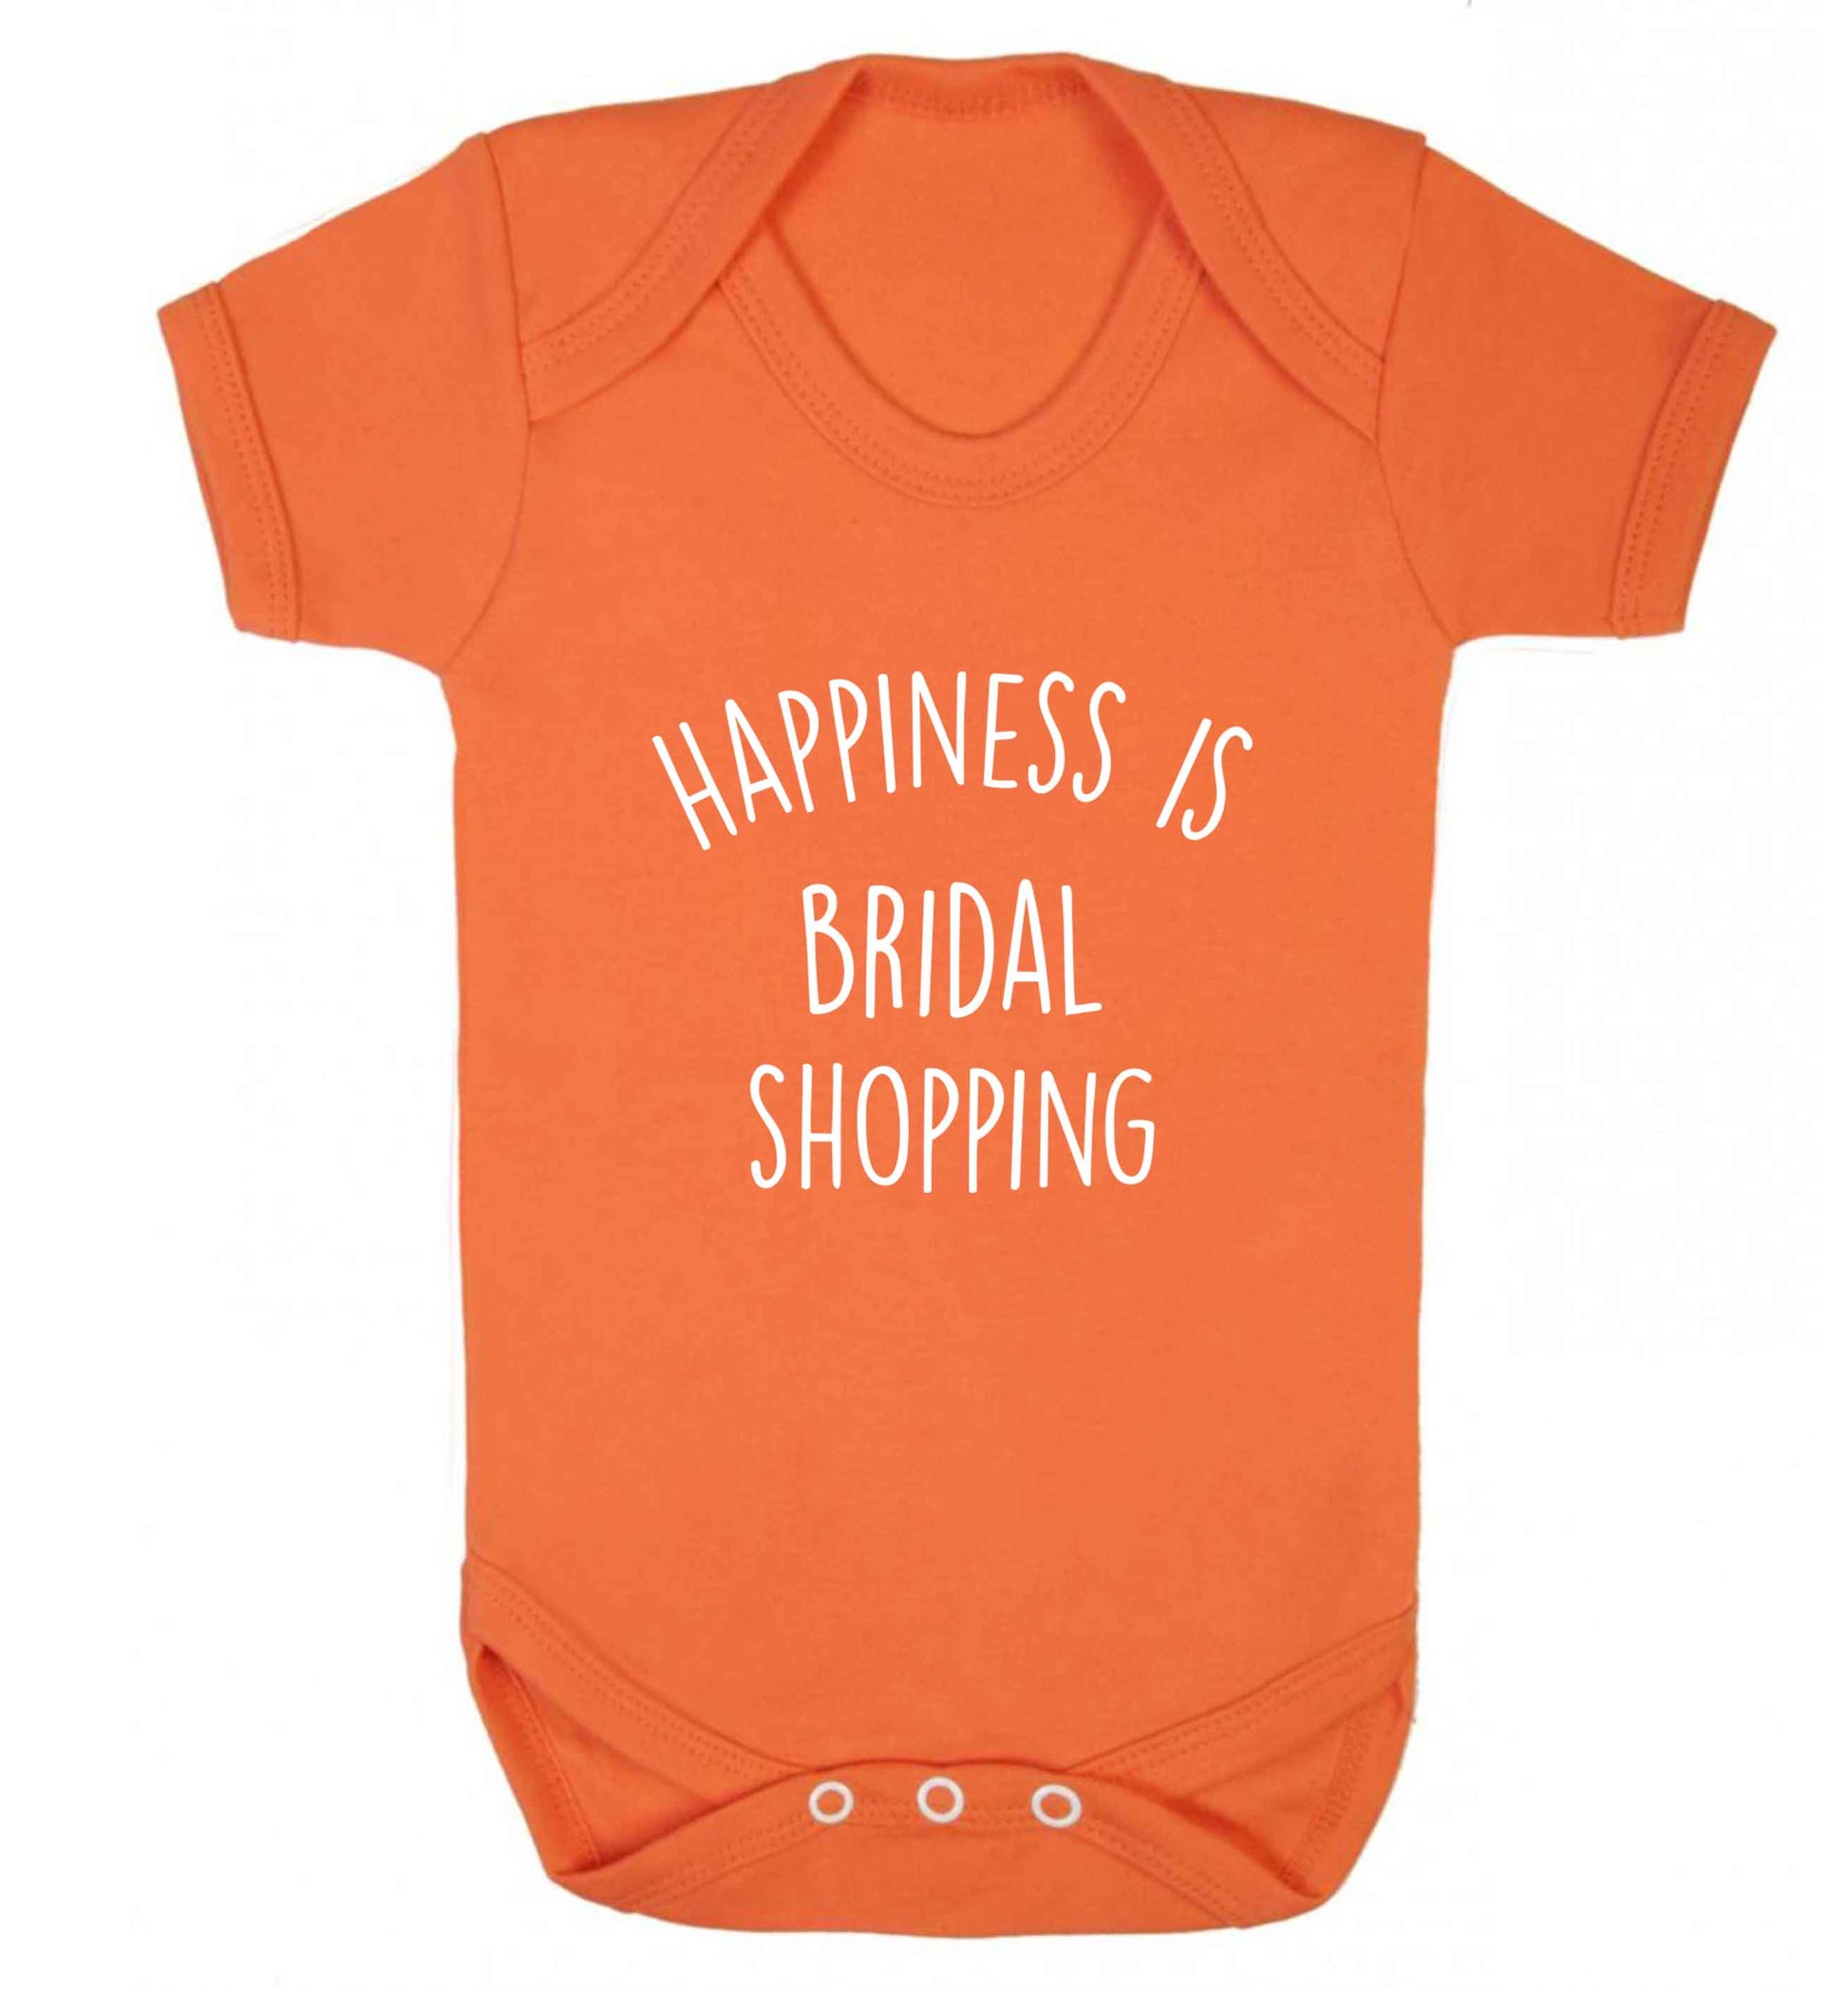 Happiness is bridal shopping baby vest orange 18-24 months